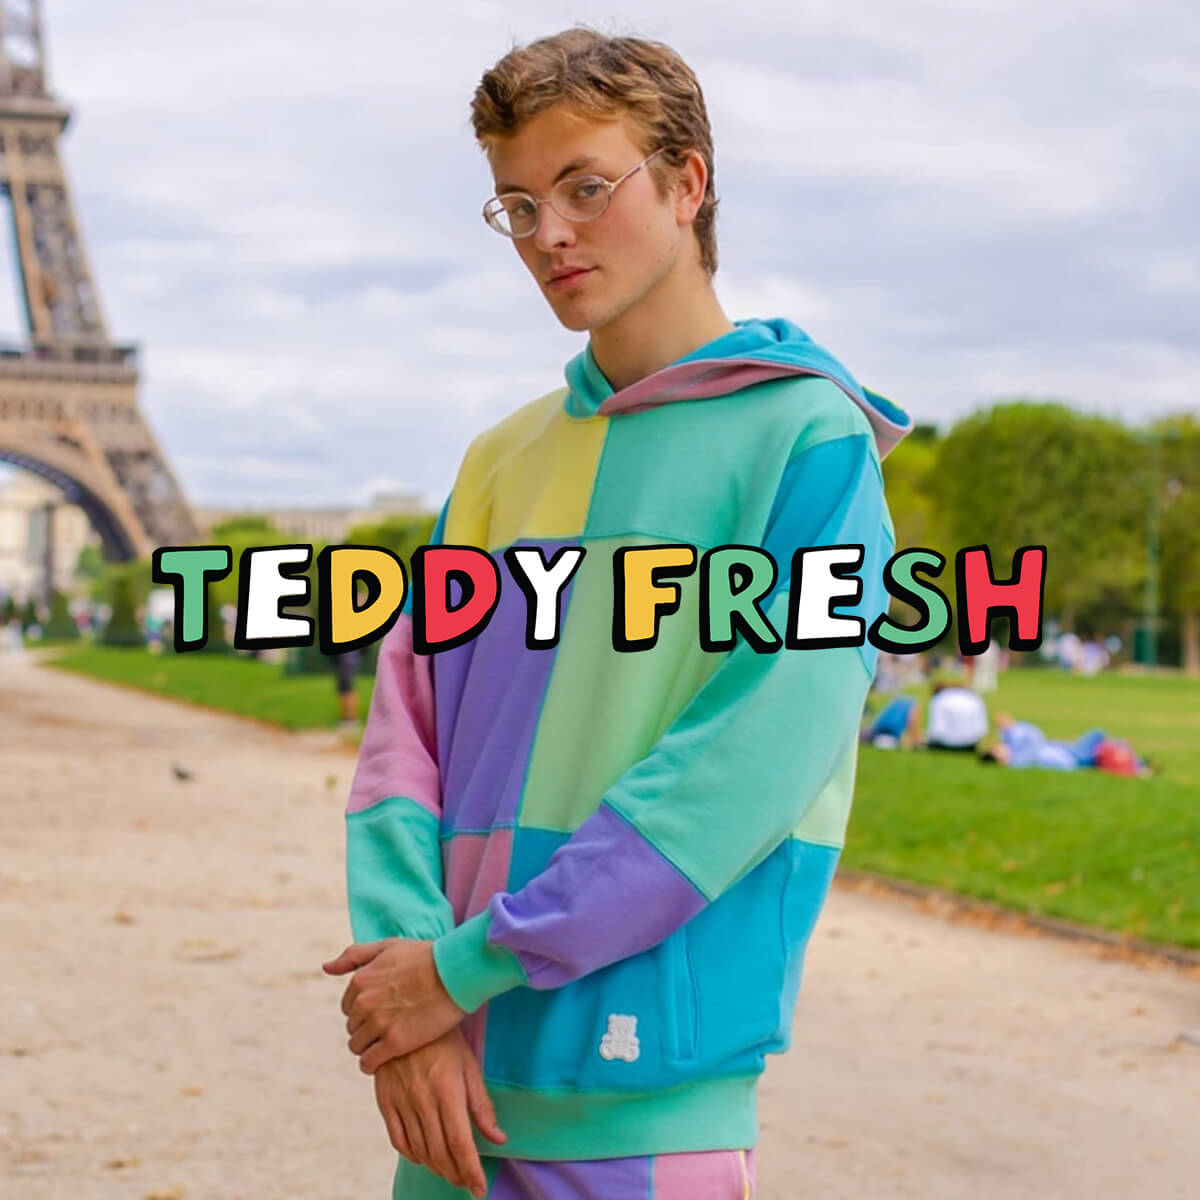 TOP SELLING COLOR BLOCK STYLES FROM TEDDY FRESH - SHOP NOW